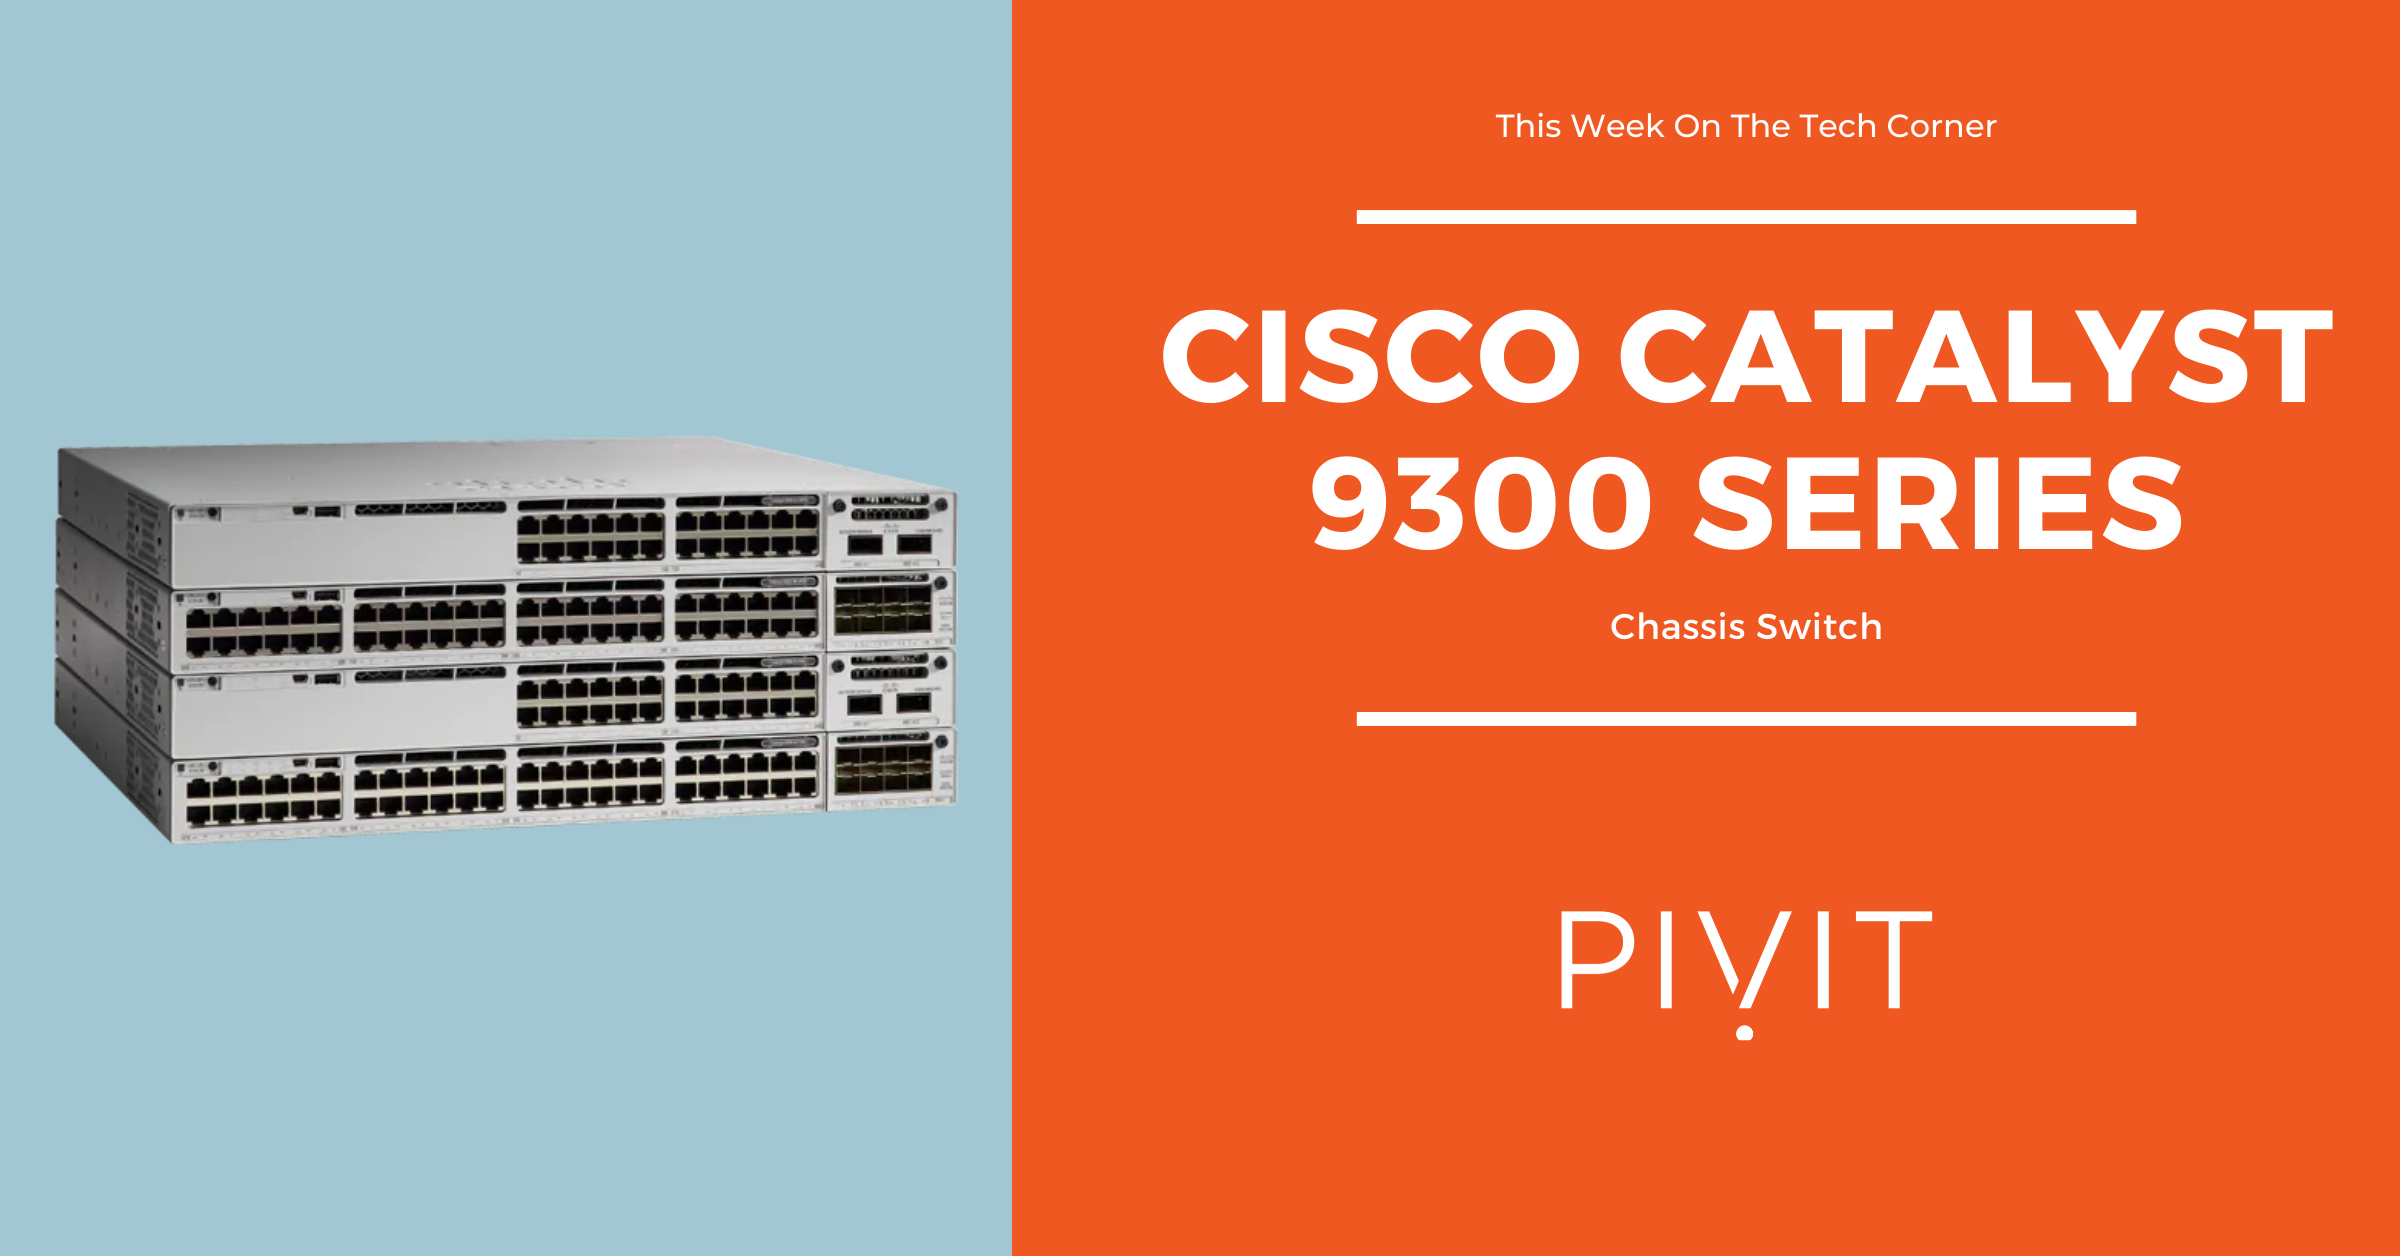 Cisco Catalyst 9300 Series Chassis Switch technical information